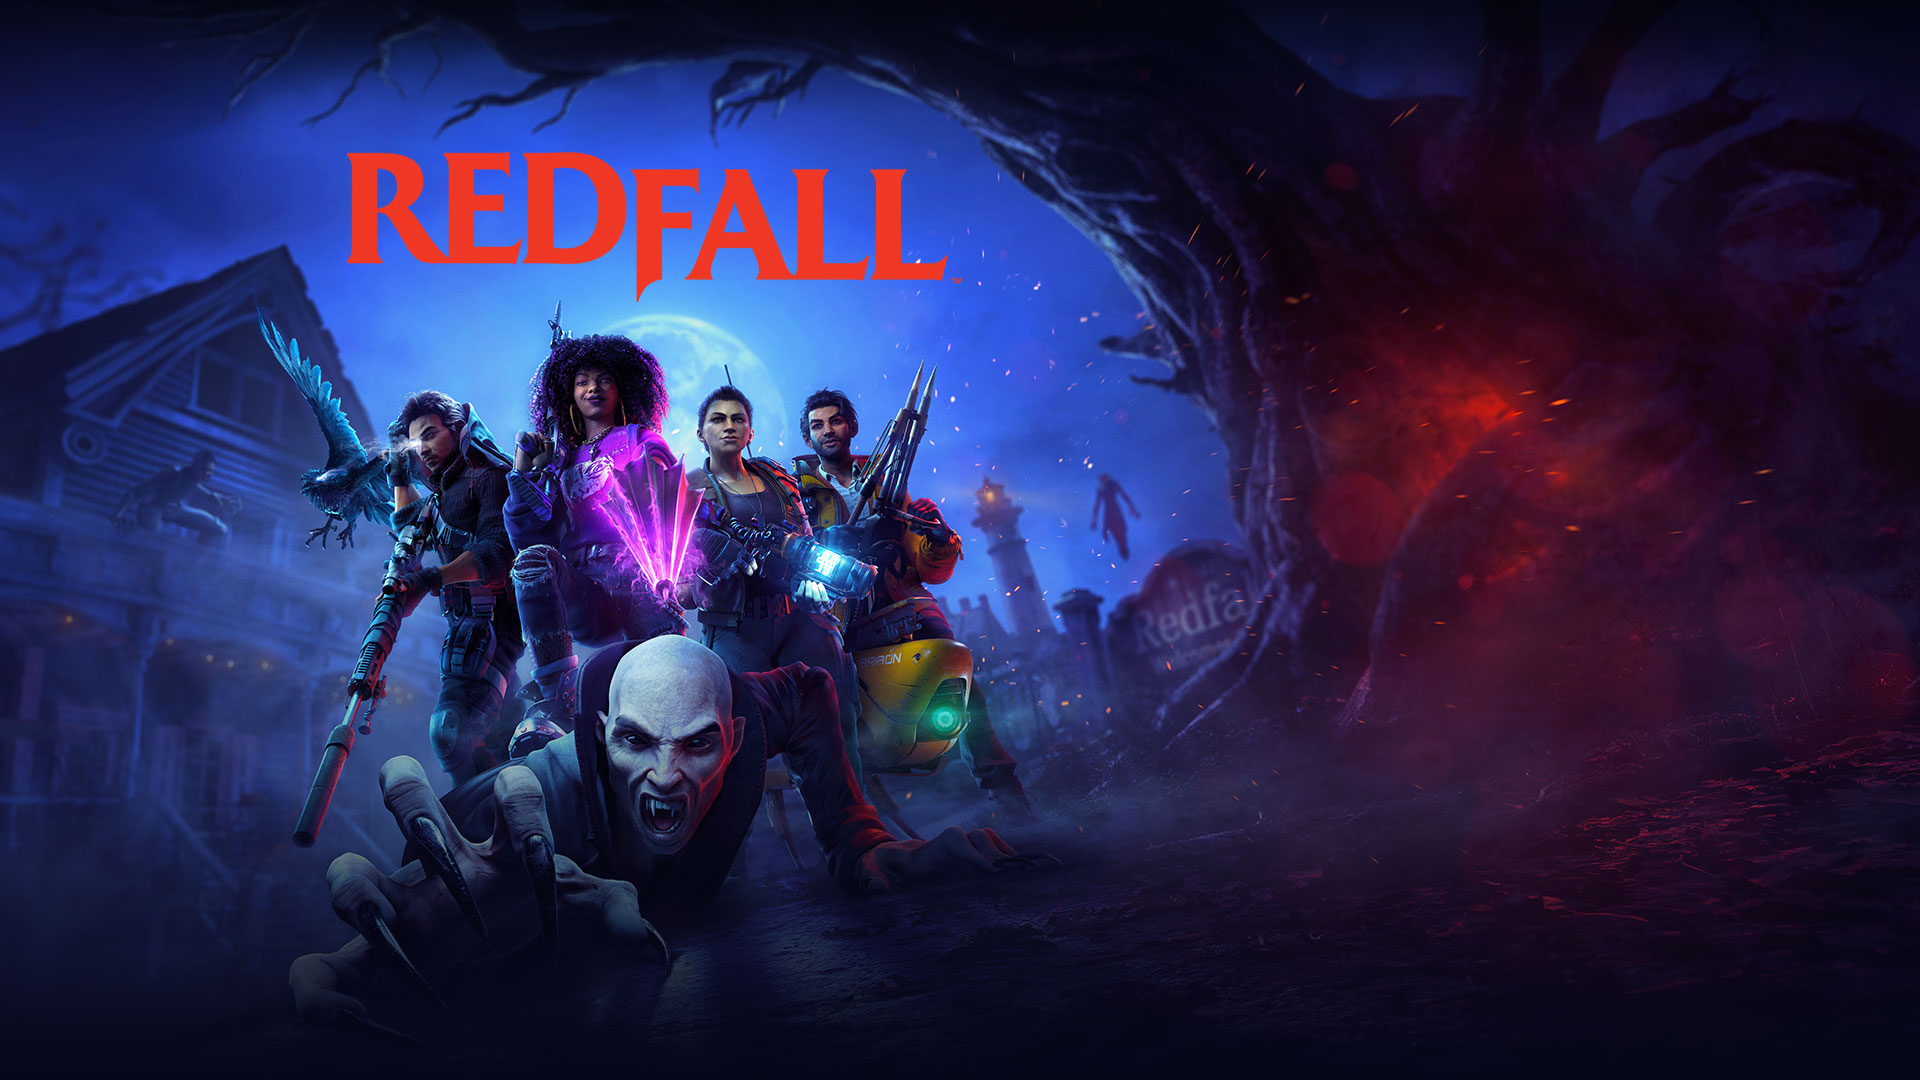 Fresh trailer for Redfall -  a cooperative vampire shooter from the creators of Dishonored